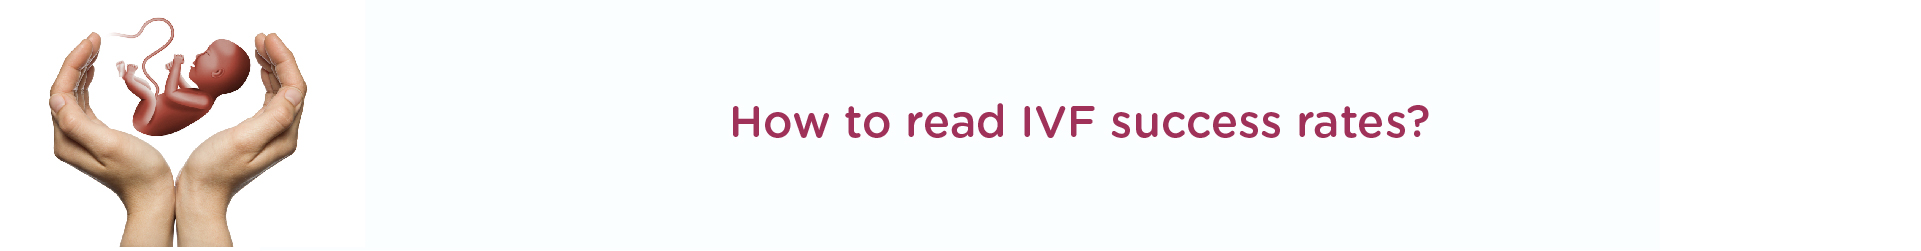 How to Read IVF Success Rates